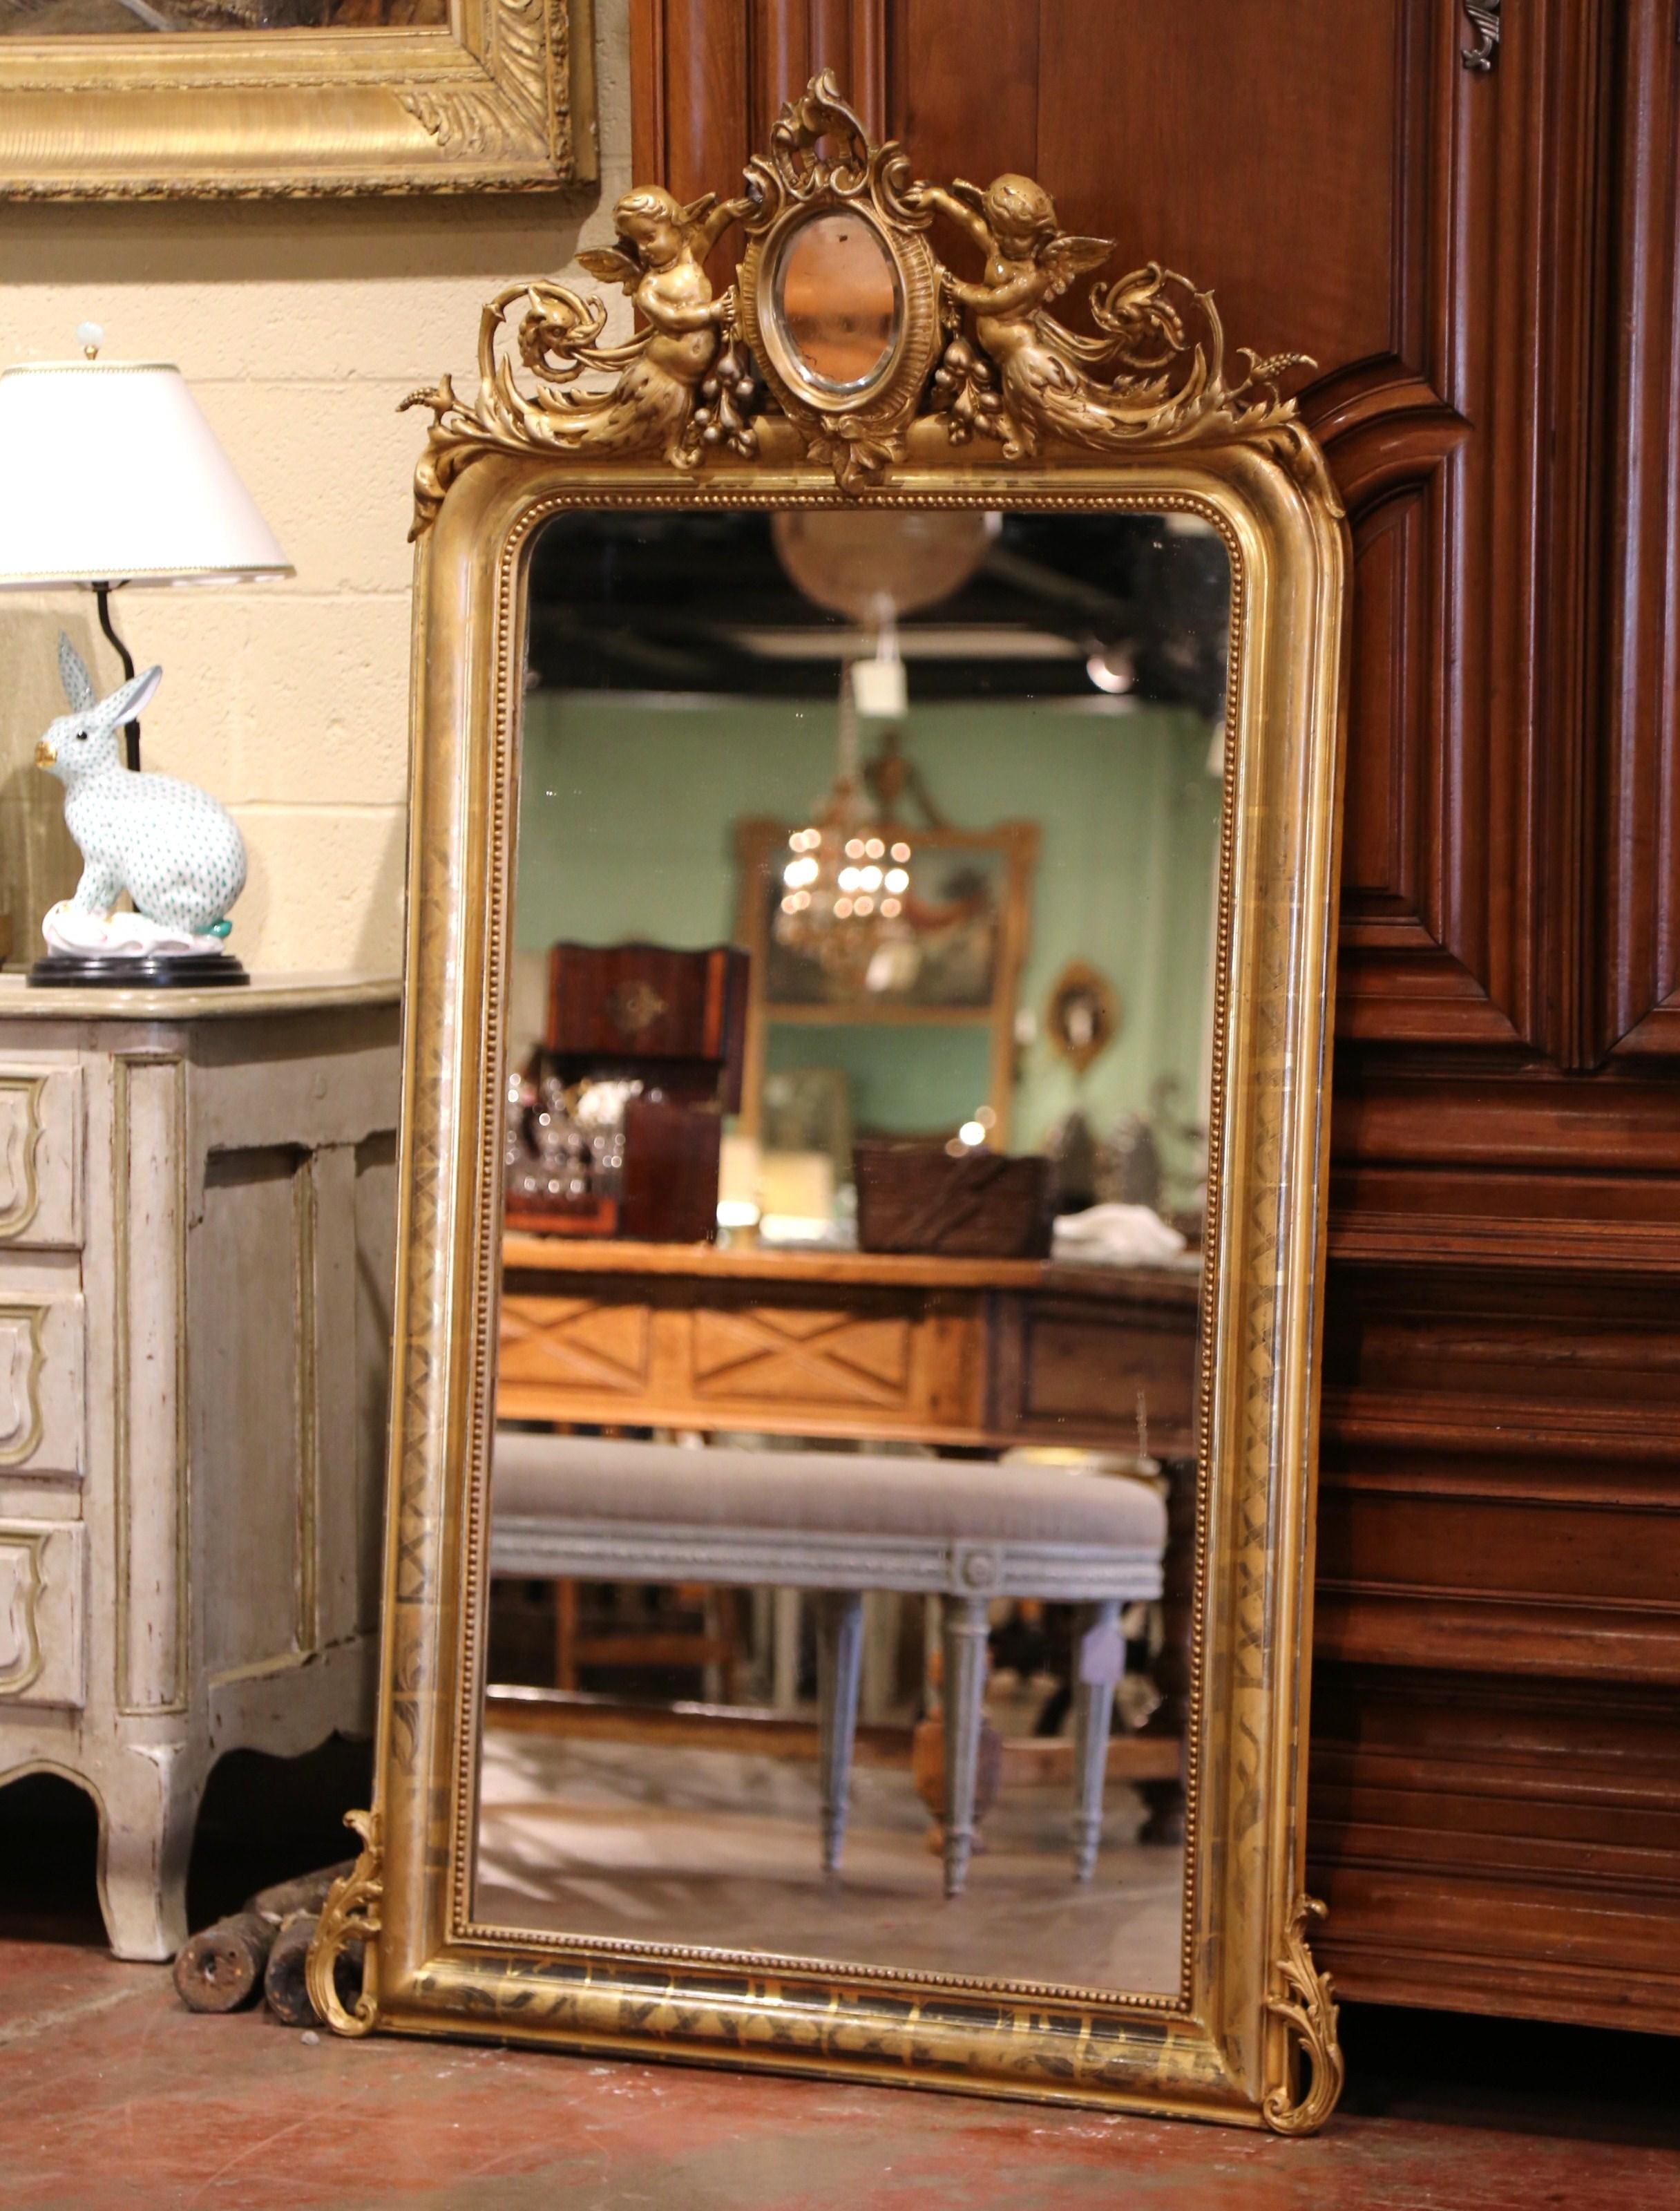 This elegant, antique wall mirror was crafted in Paris, France, circa 1870. The mirror is decorated at the pediment with a small oval cartouche mirror in the center held by a pair of carved cherubs. The gilt frame, dressed with the original mercury